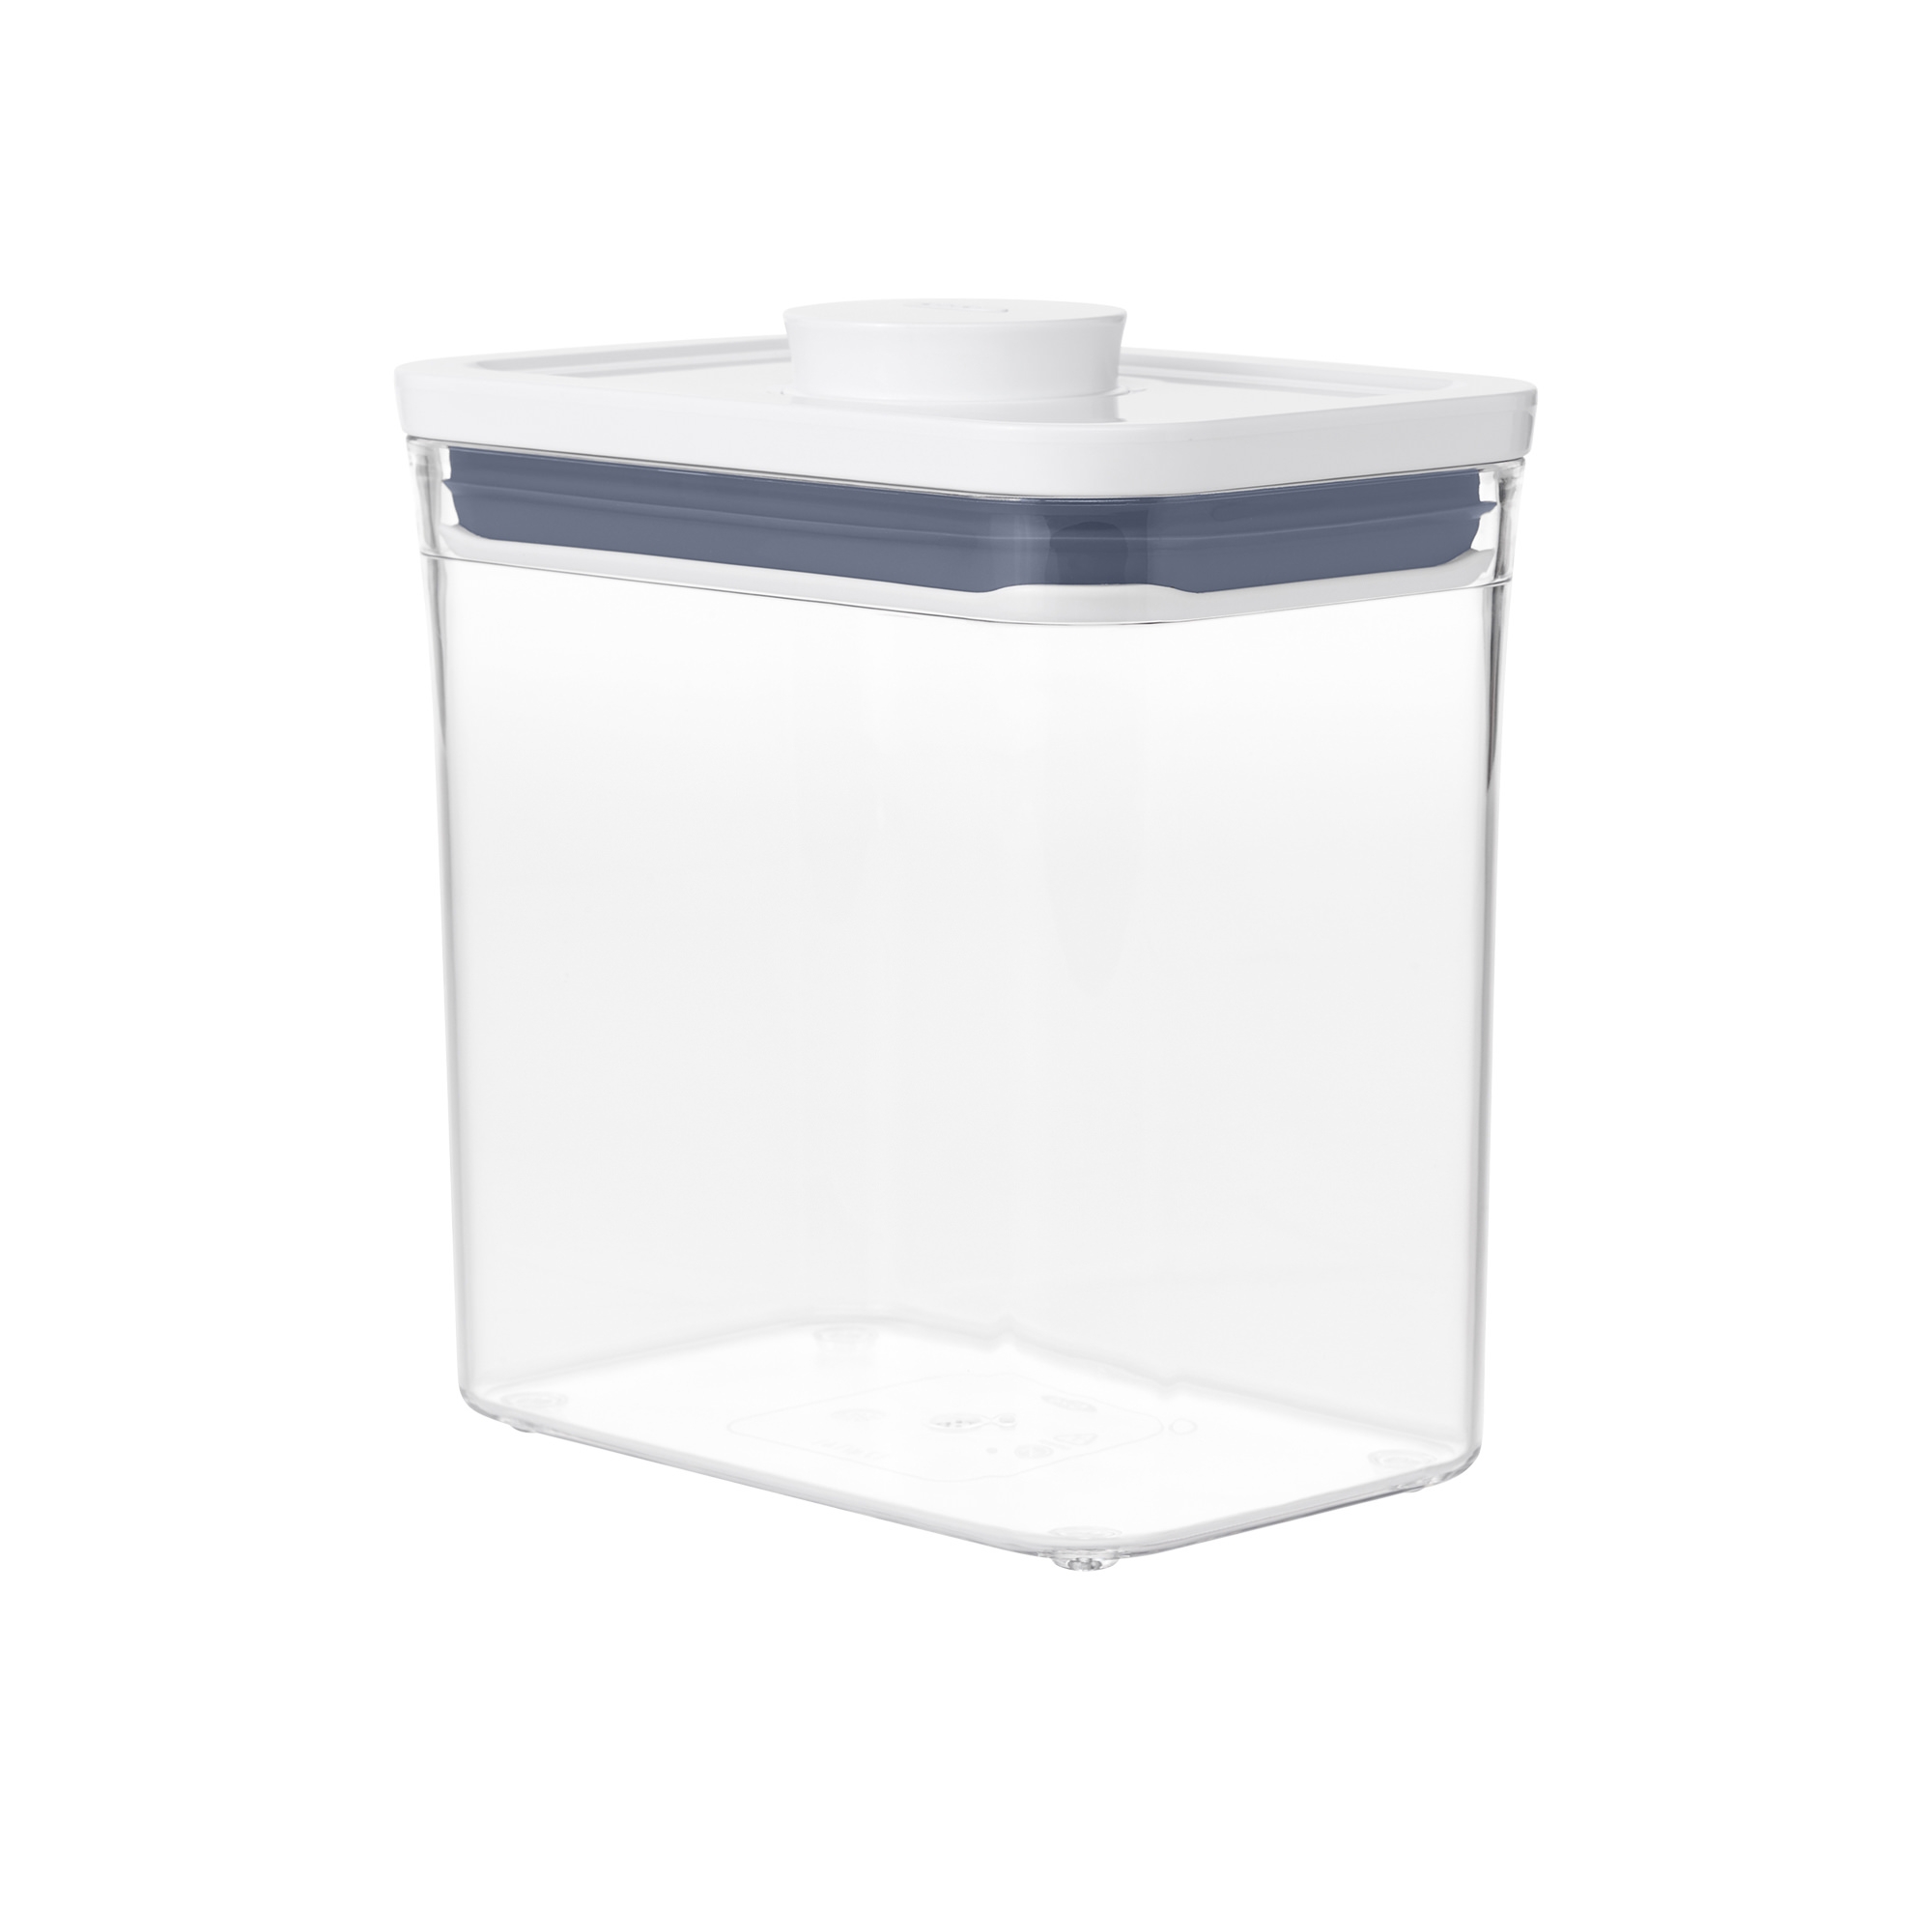 OXO Good Grips Rectangular Pop 2.0 Container 1.6L Image 1